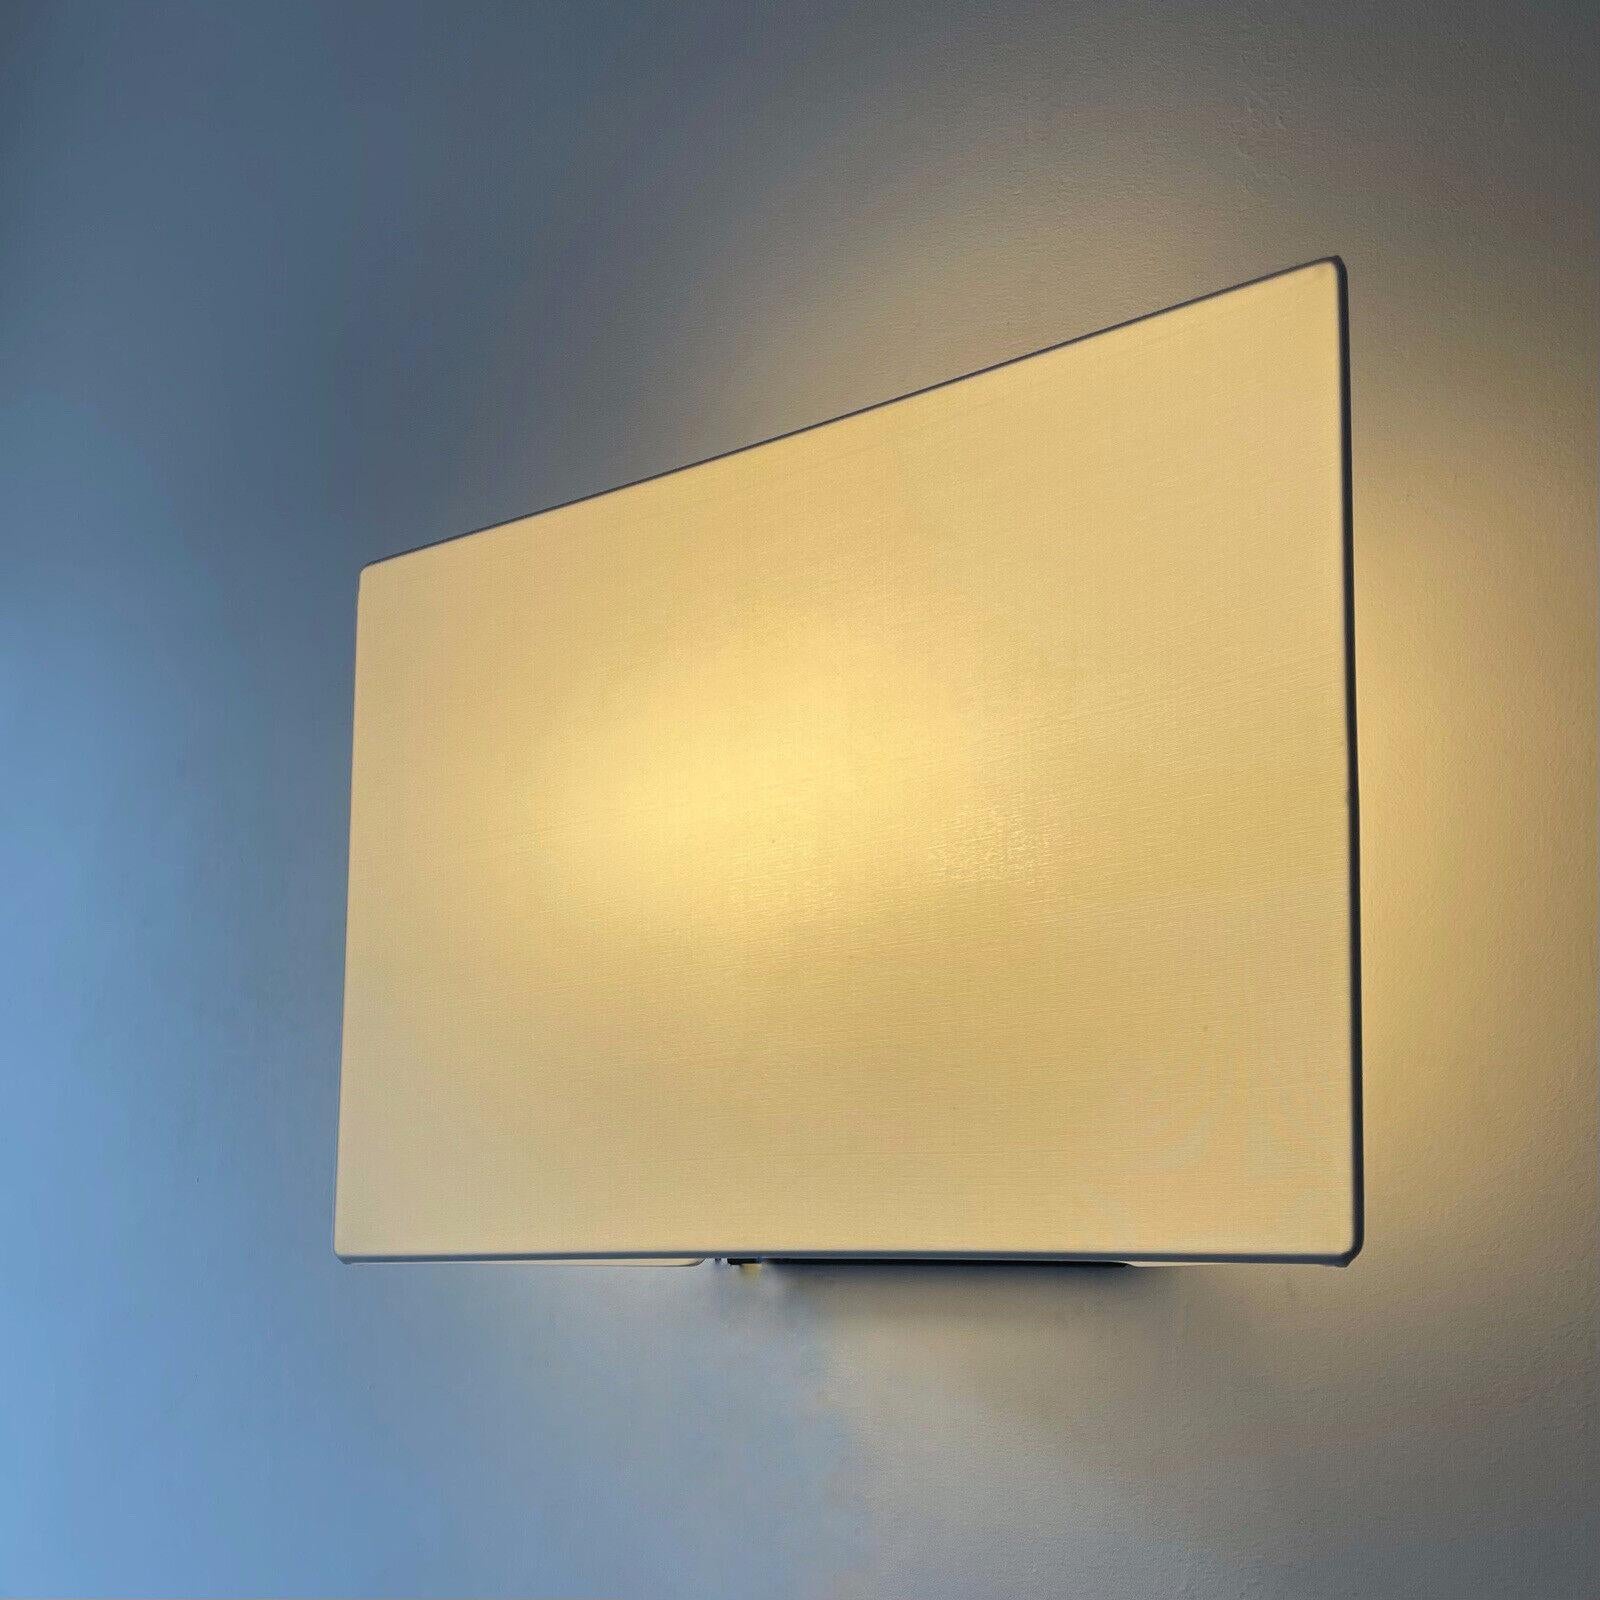 Accademia Medium Wall Lamp by Cini Boeri for Artemide 1978 In Good Condition For Sale In Barcelona, ES